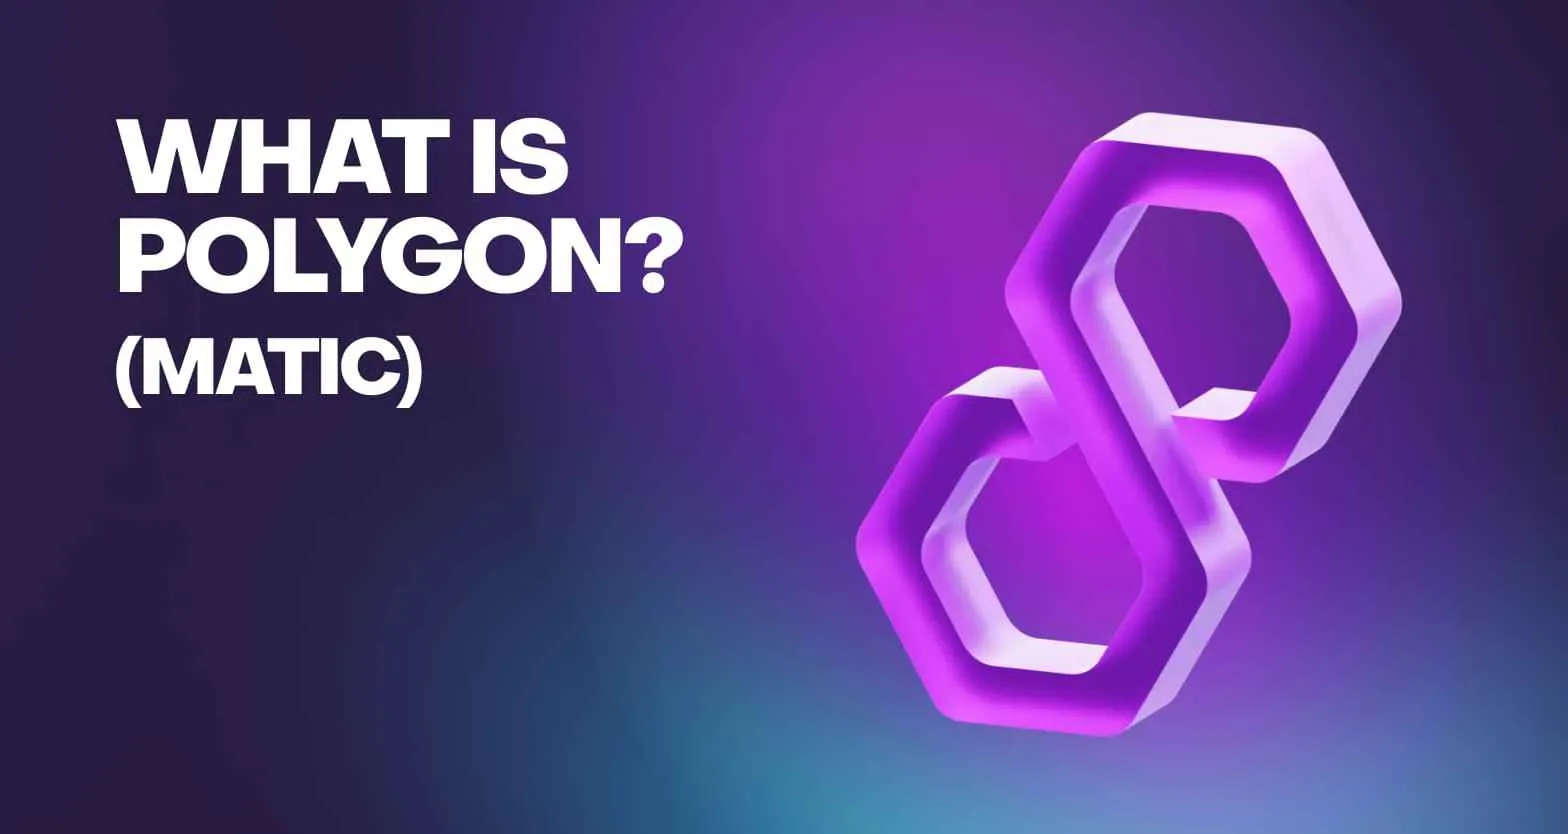 What Is Polygon? A Beginner’s Guide To Polygin_65d5caf659cd0.jpeg